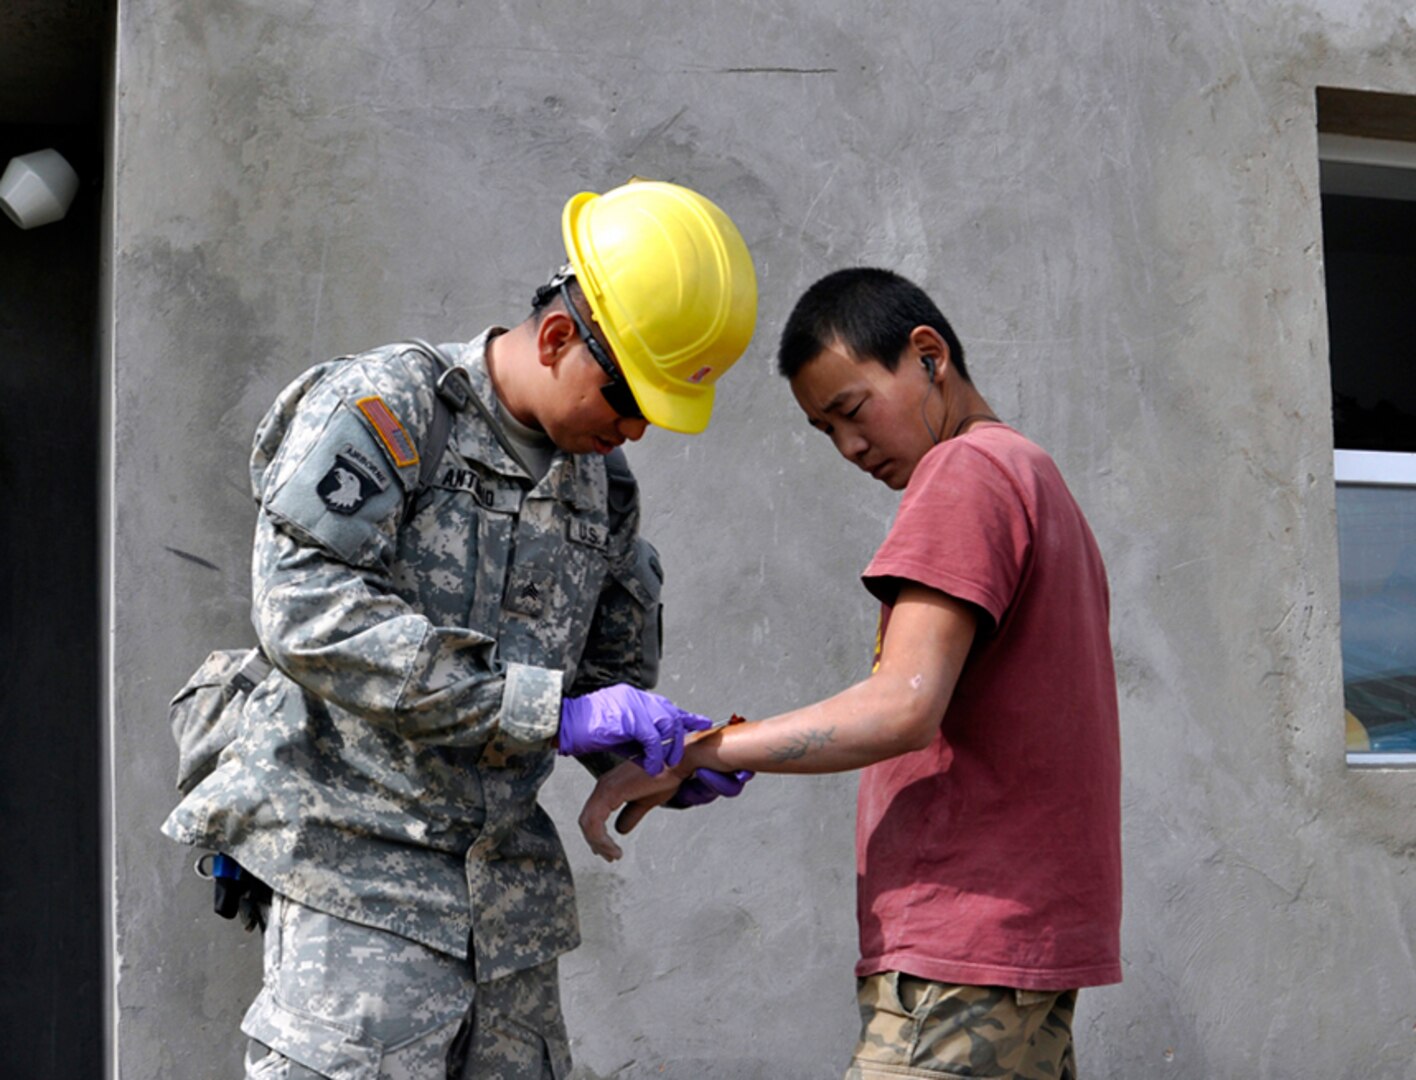 Sgt. Edward Antonio, a medic with the Alaska Army National Guard’s 297th Military Police Company, from Juneau, Alaska treats a cut on the arm of Sgt. Galbadrehk Galae, Mongolia Armed Forces, in the Songinokhairkhan district of Ulaanbaatar, Mongolia Aug. 16. Sgt. Antonio is working with the 797th Engineering Company (Vertical) from Barrigada, Guam and the Mongolian Armed Forces during Khaan Quest 2010. Sgt Antonio’s is responsible for providing medical support to both US and Mongolian participants.